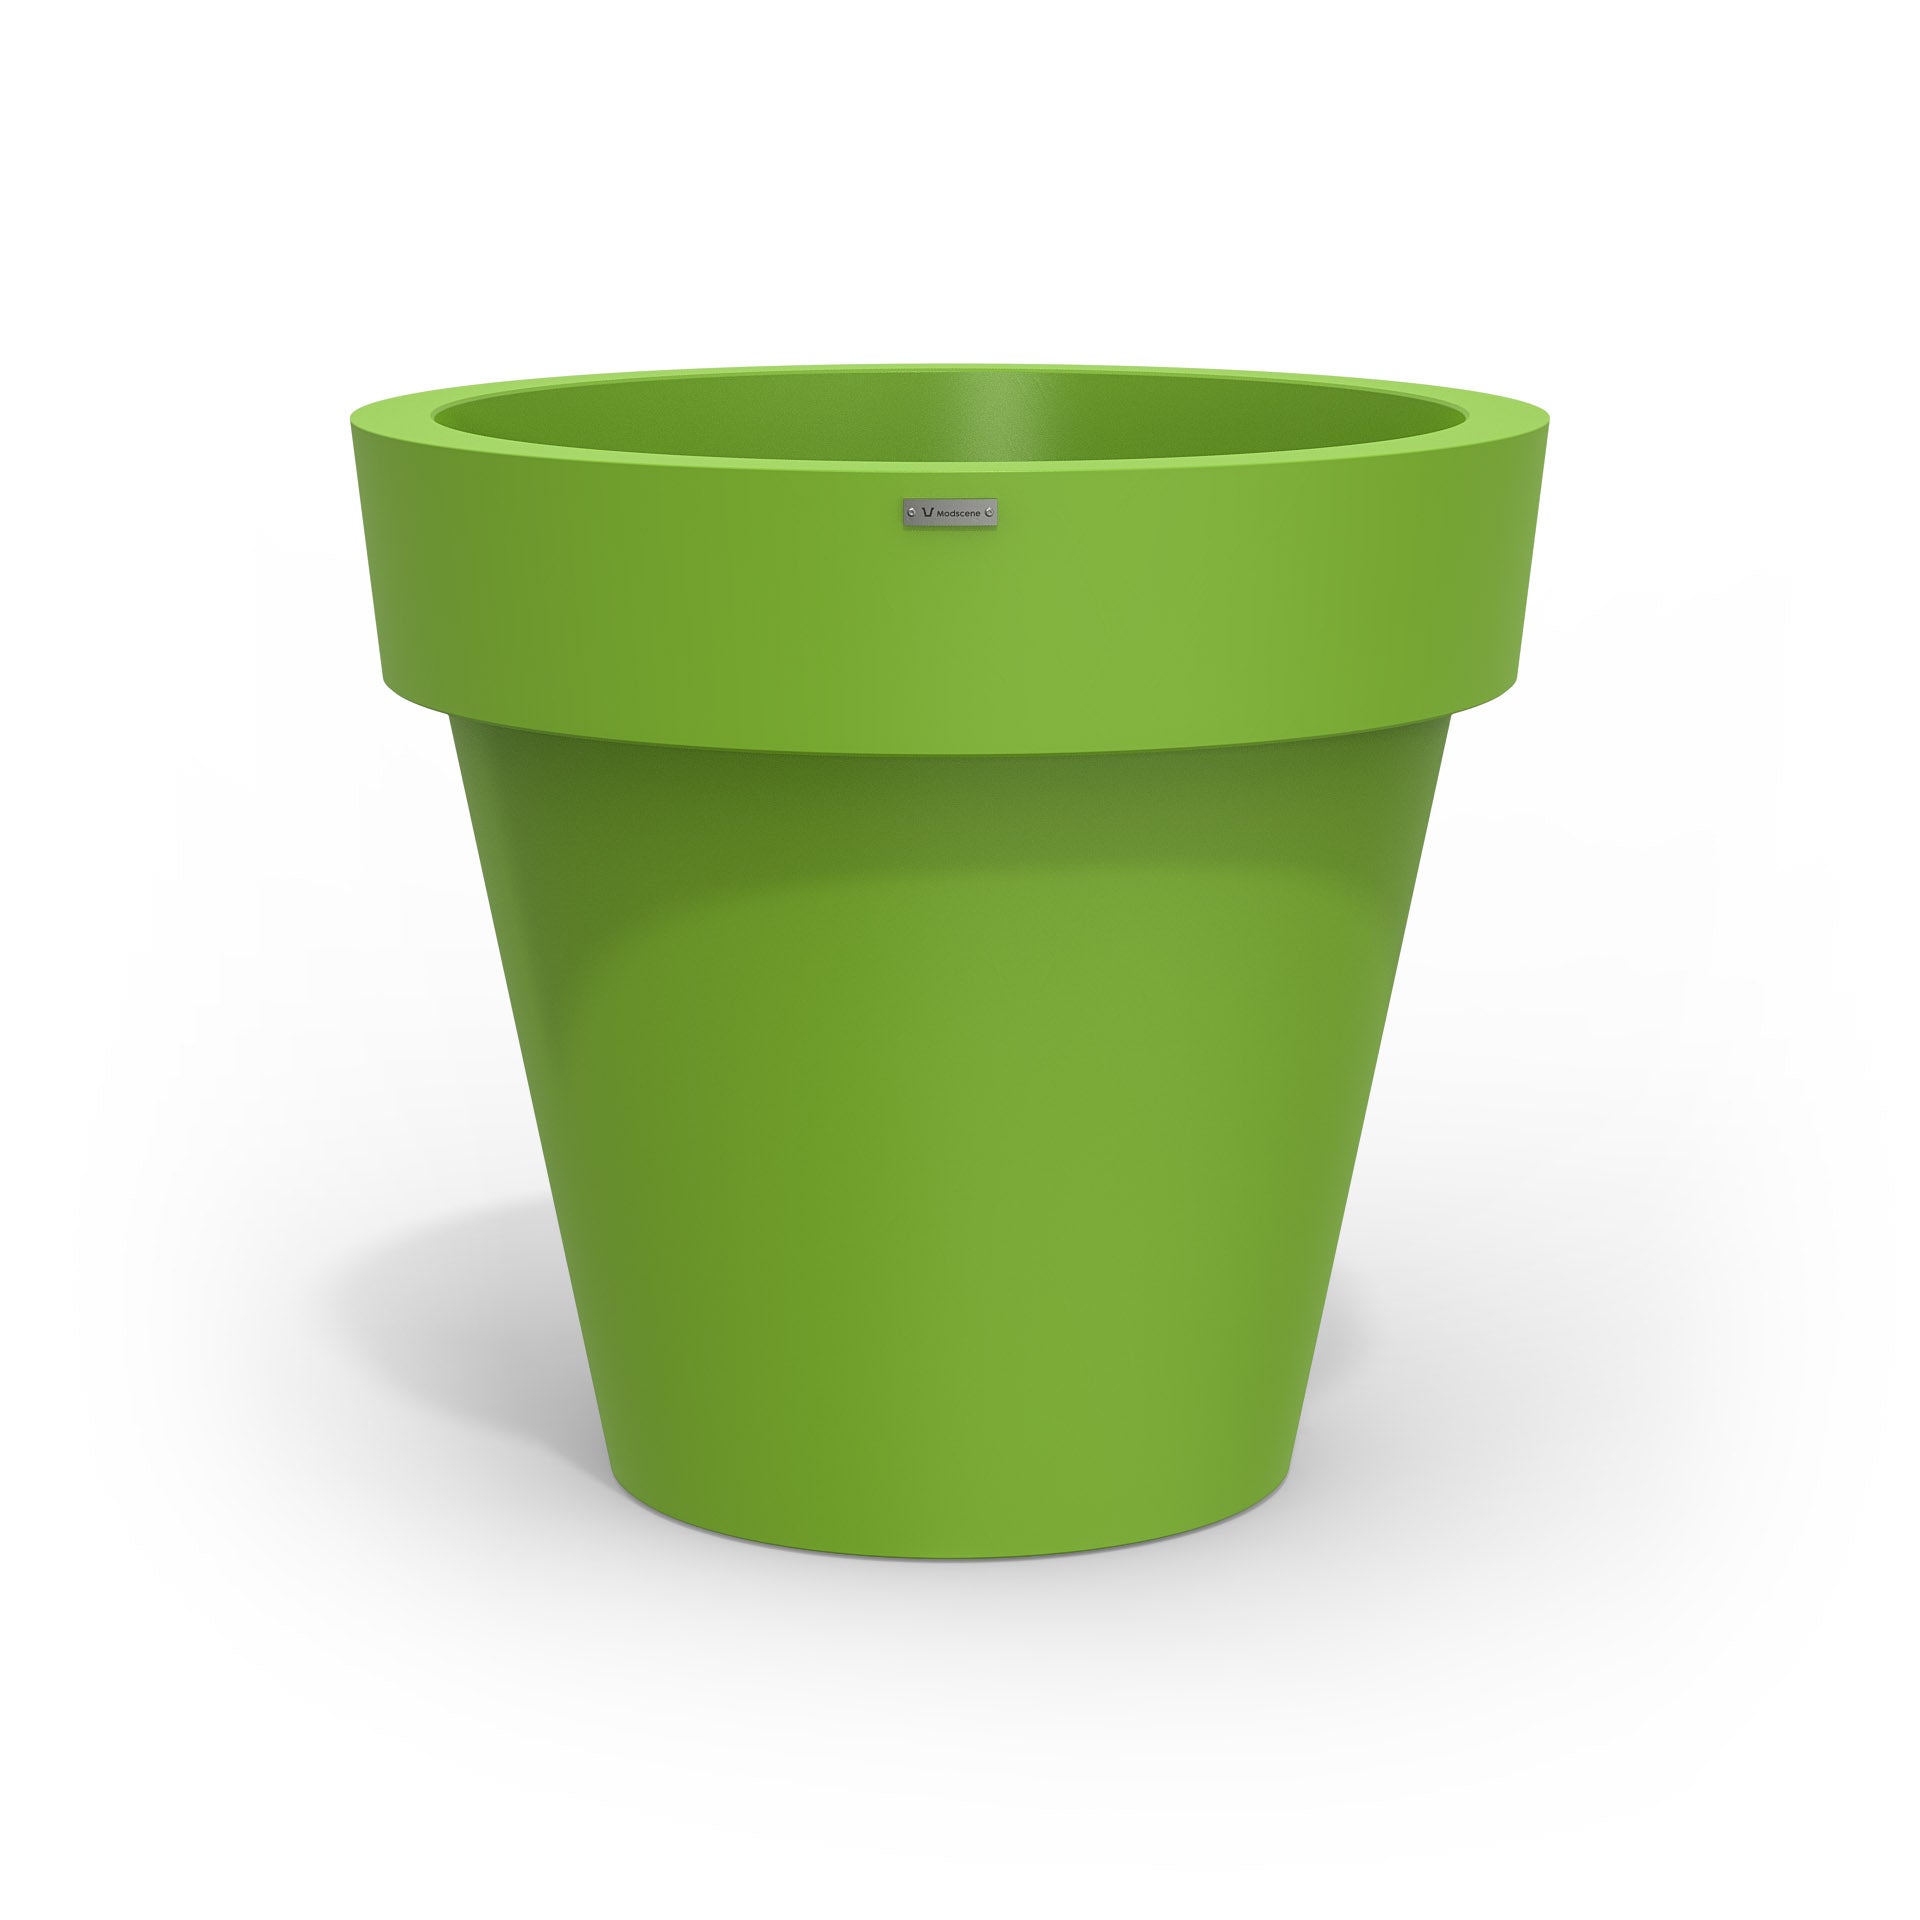 Large Modscene plastic planter pot in a green colour. New Zealand made.